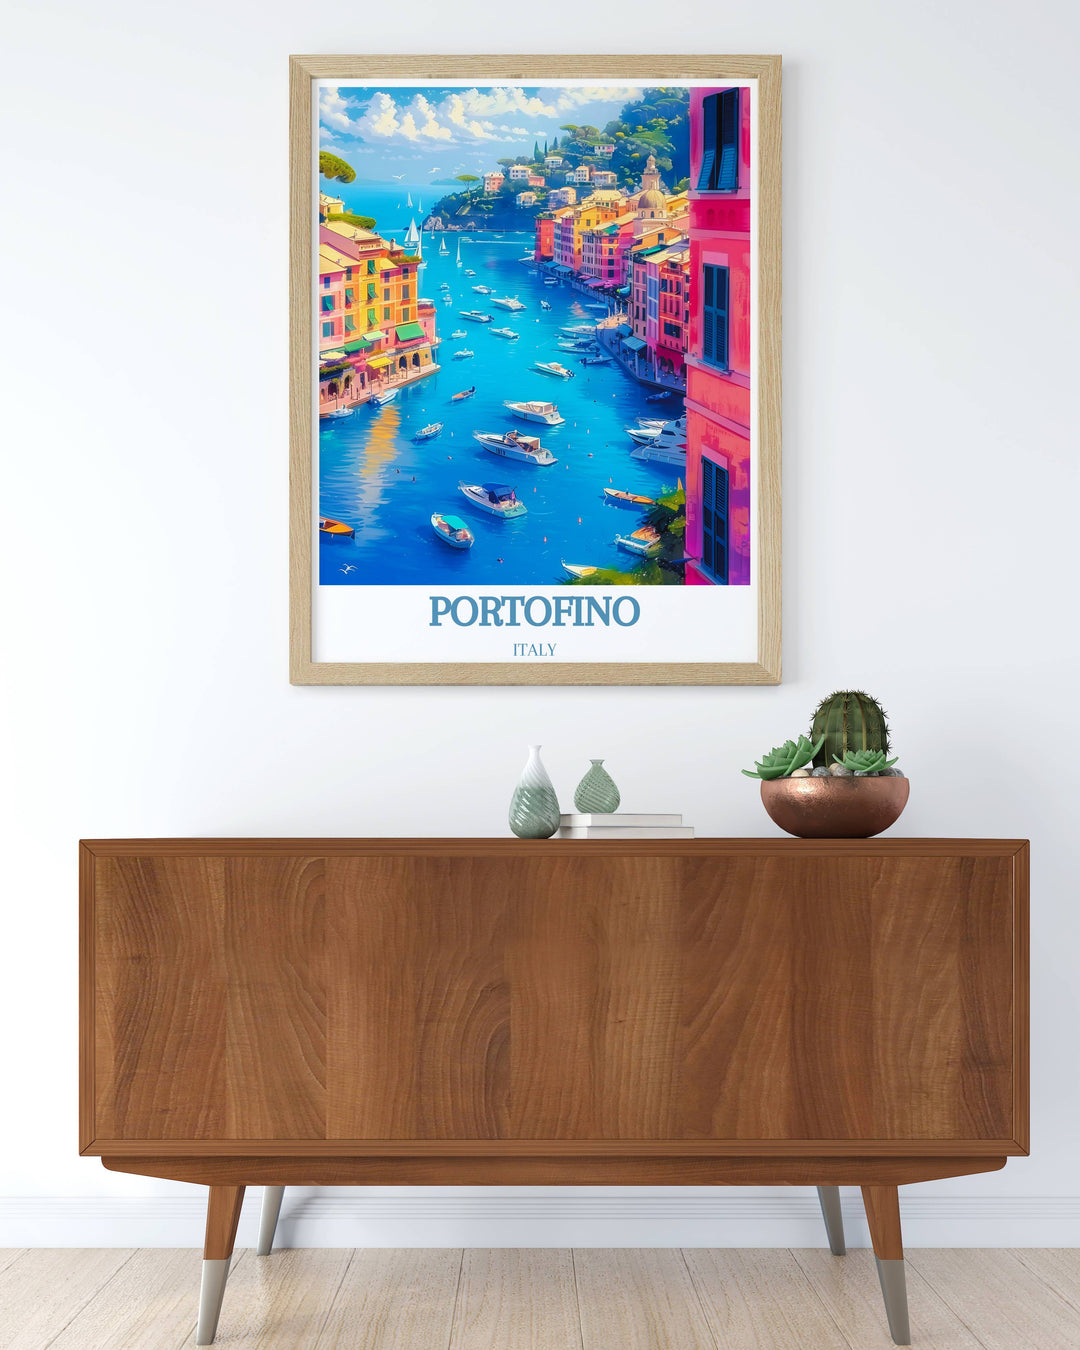 Portofino Travel Poster depicting the stunning views of the Italian coast, with vibrant colors and intricate details capturing the unique charm of this iconic location.